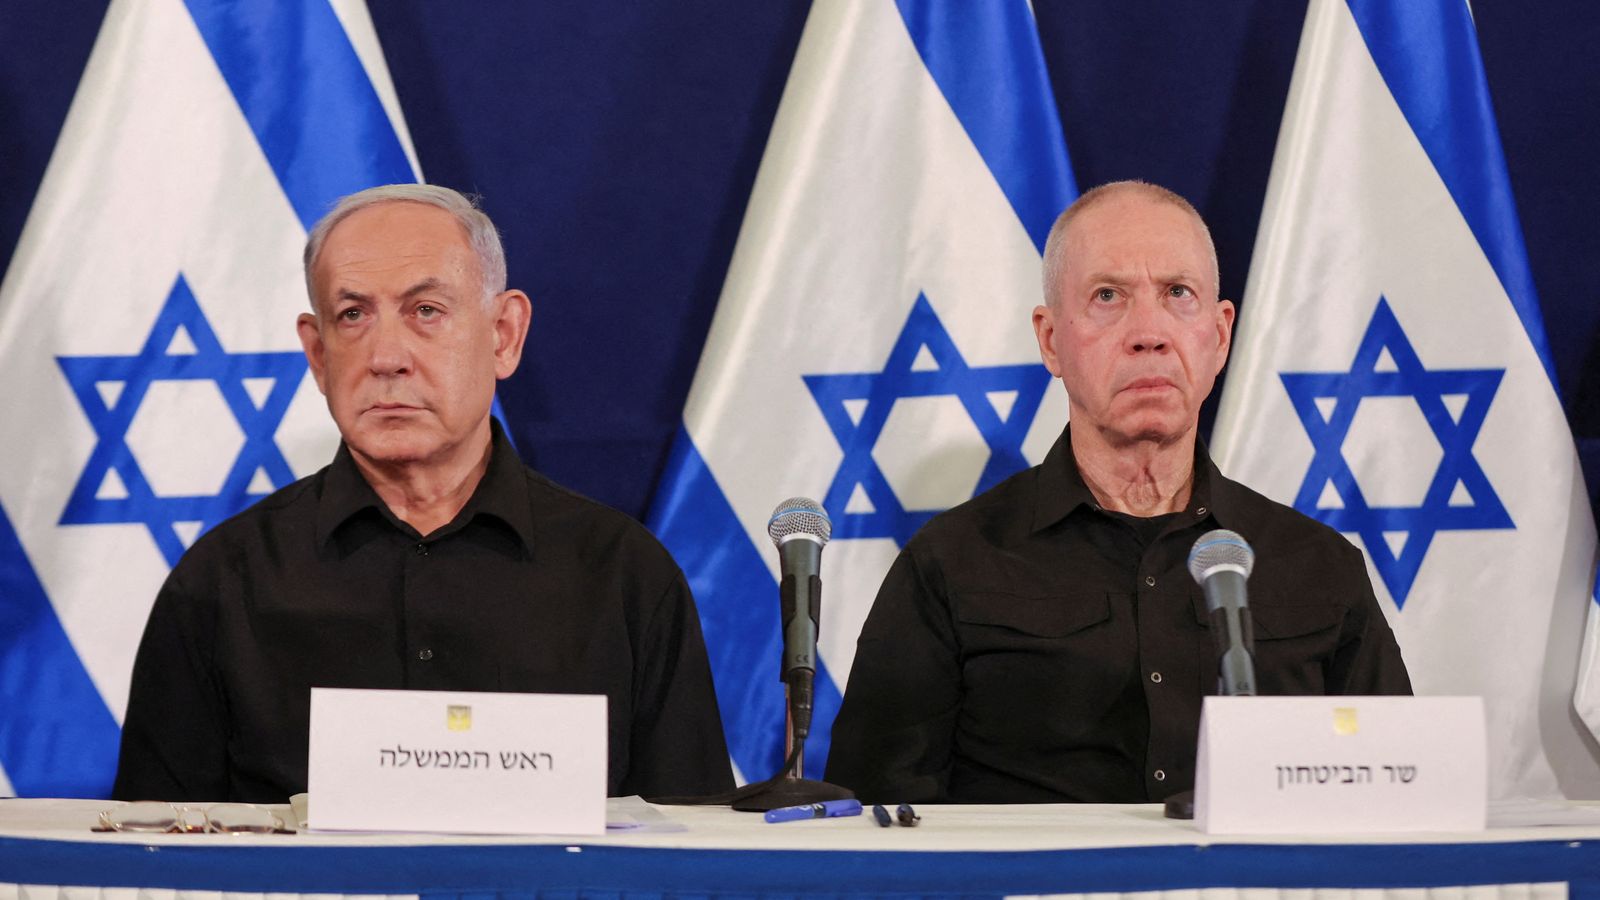 Israeli defence minister publicly criticising Benjamin Netanyahu was a dramatic move